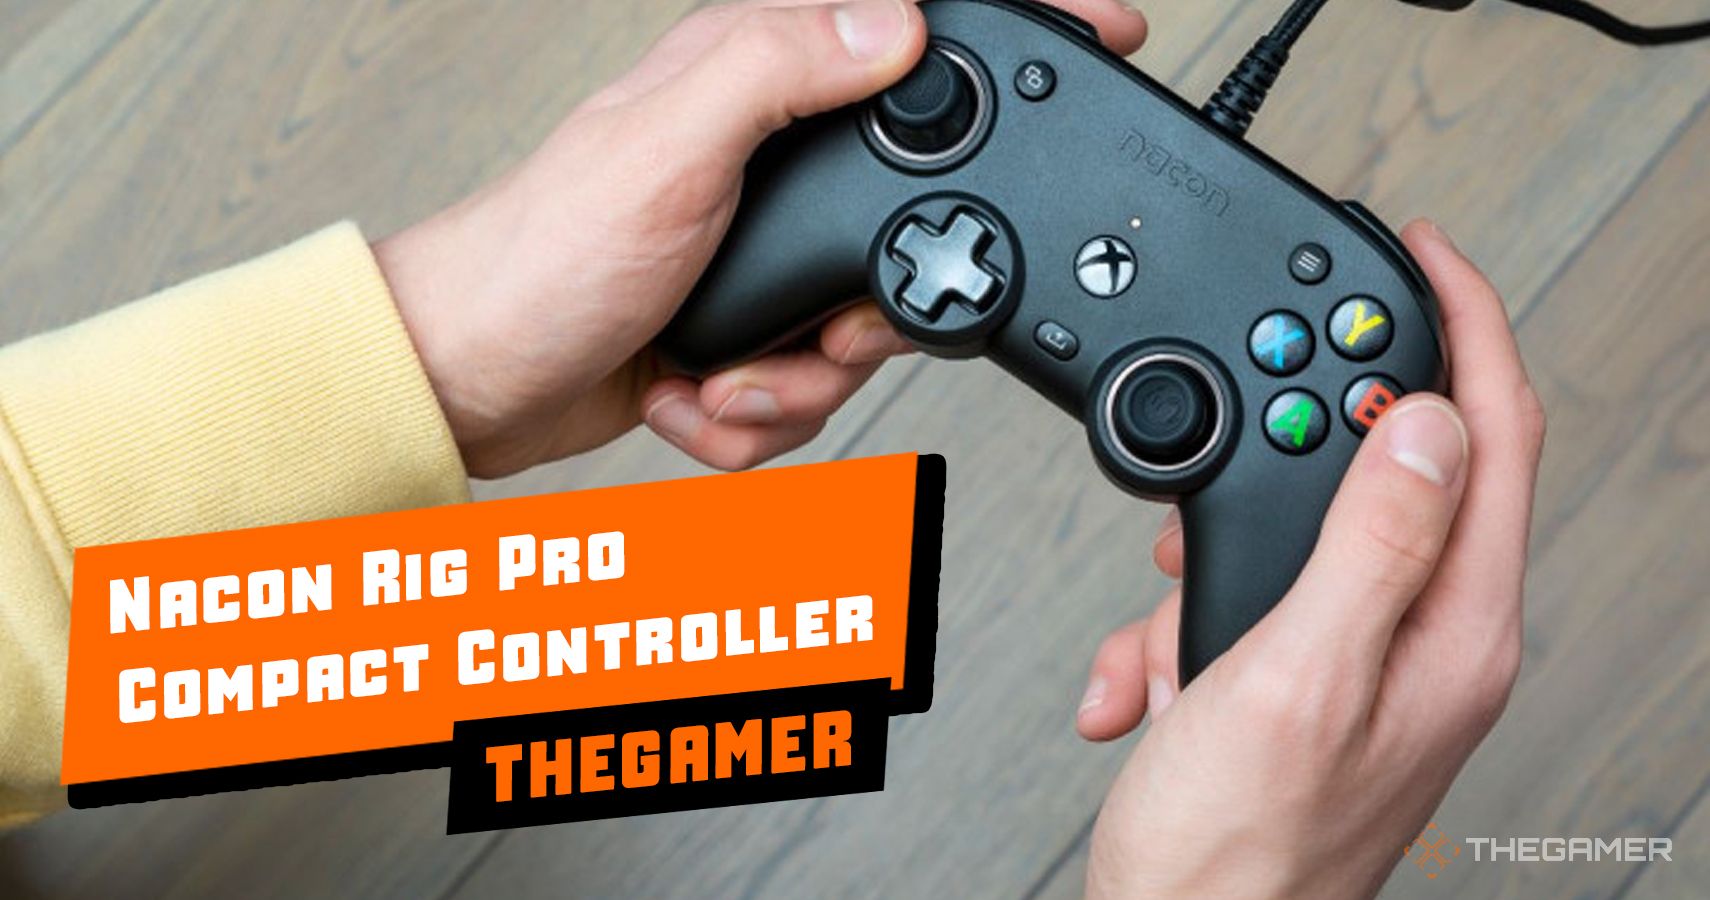 Nacon Rig Pro Compact Controller Review This Bad Boy Can Fit So Much Customization